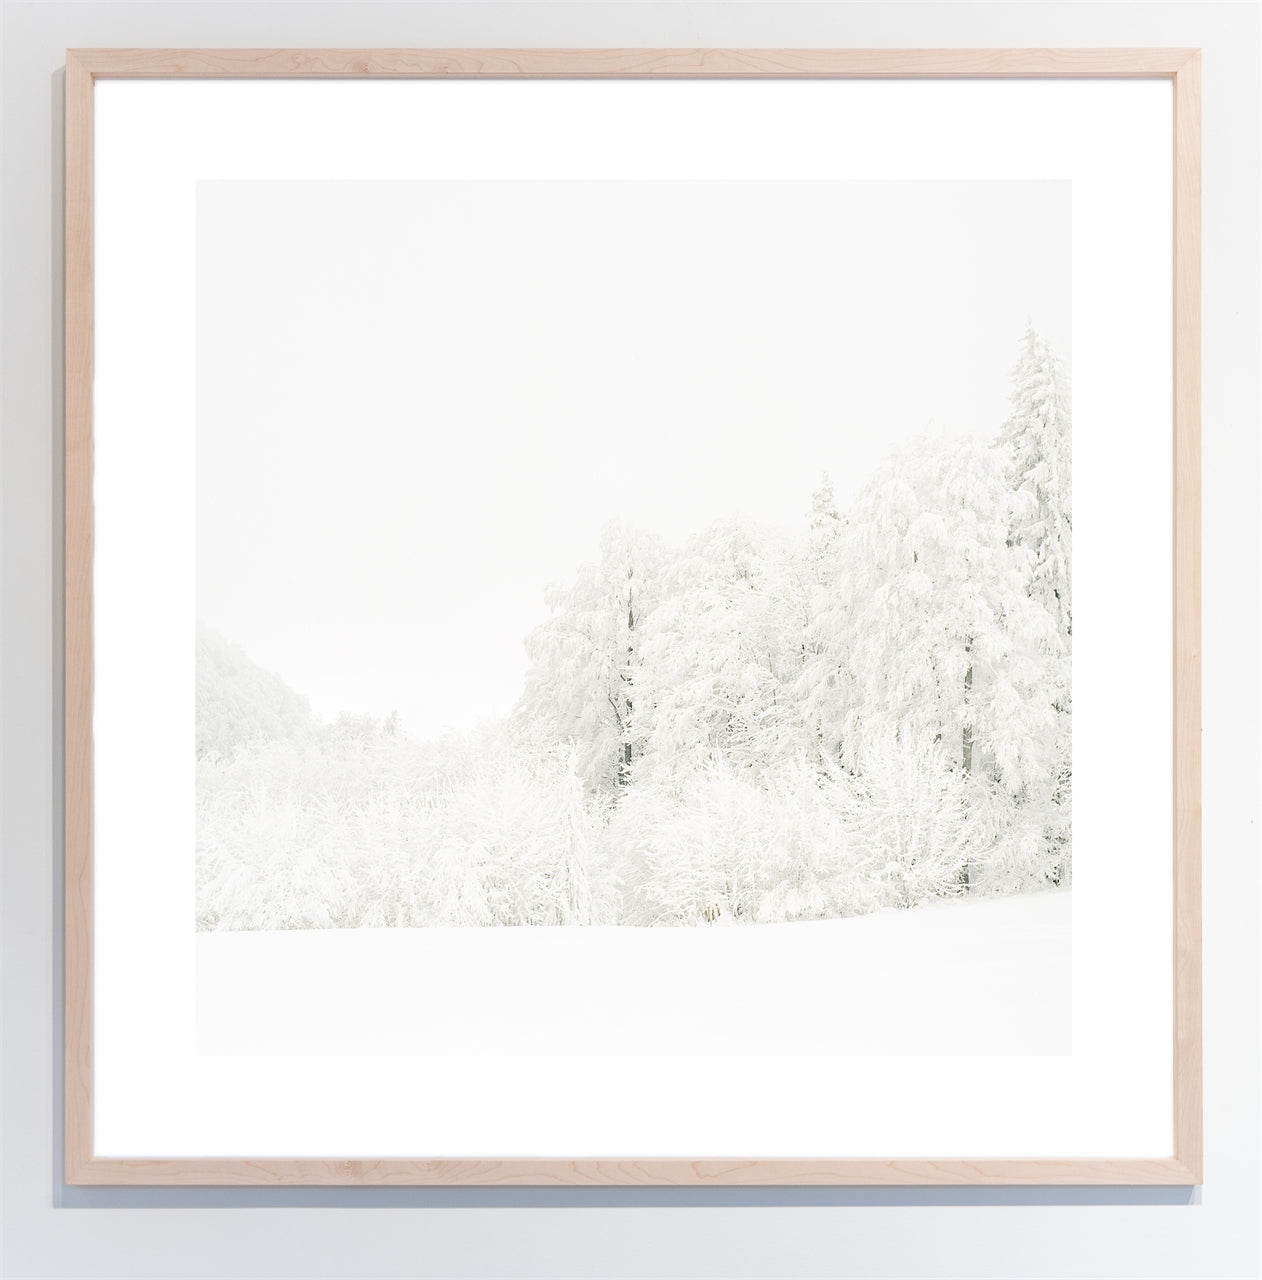 Winter Forest I